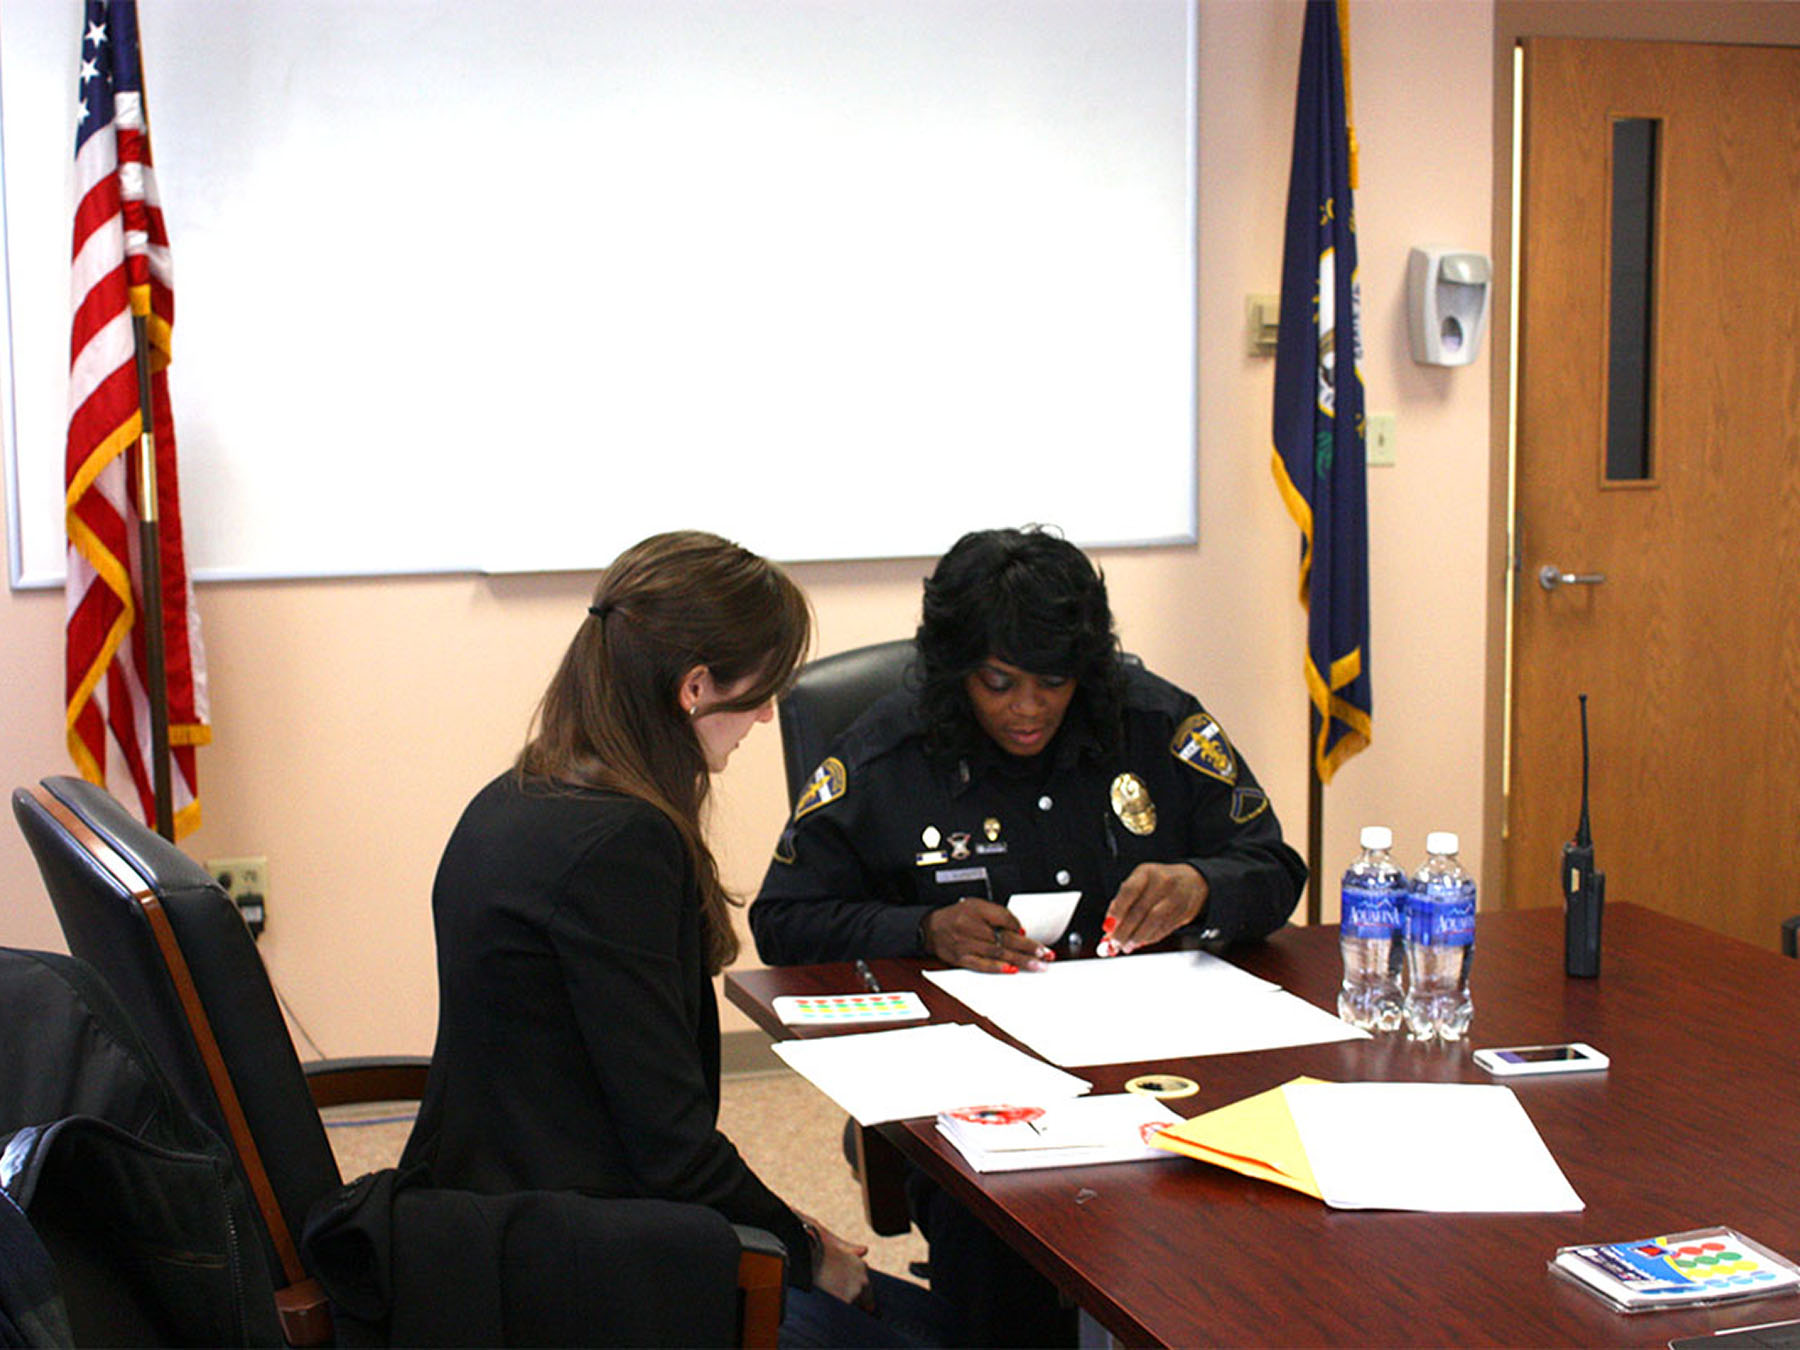 A Public Policy Lab team member talks with a police officer over several documents at a conference table.